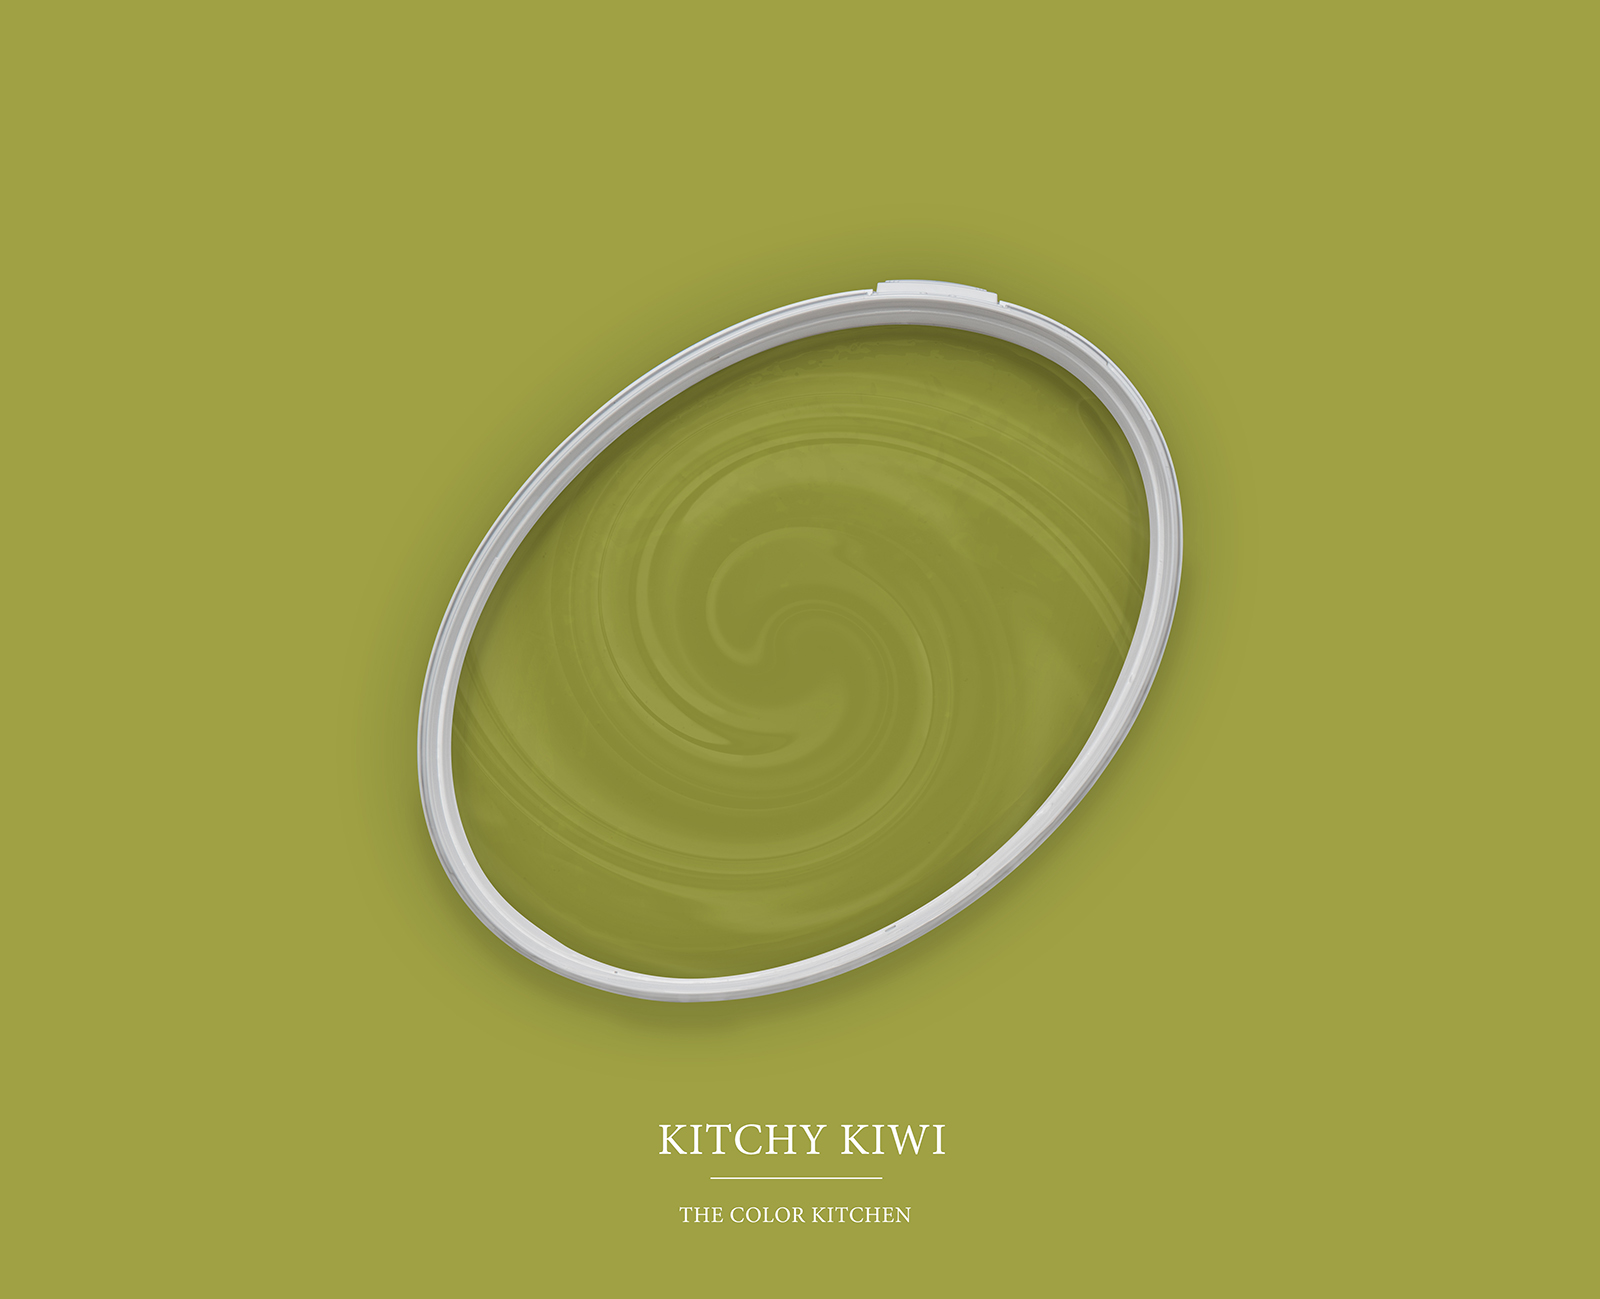 Wall Paint TCK4009 »Kitchy Kiwi« in bright yellow green – 5.0 litre
